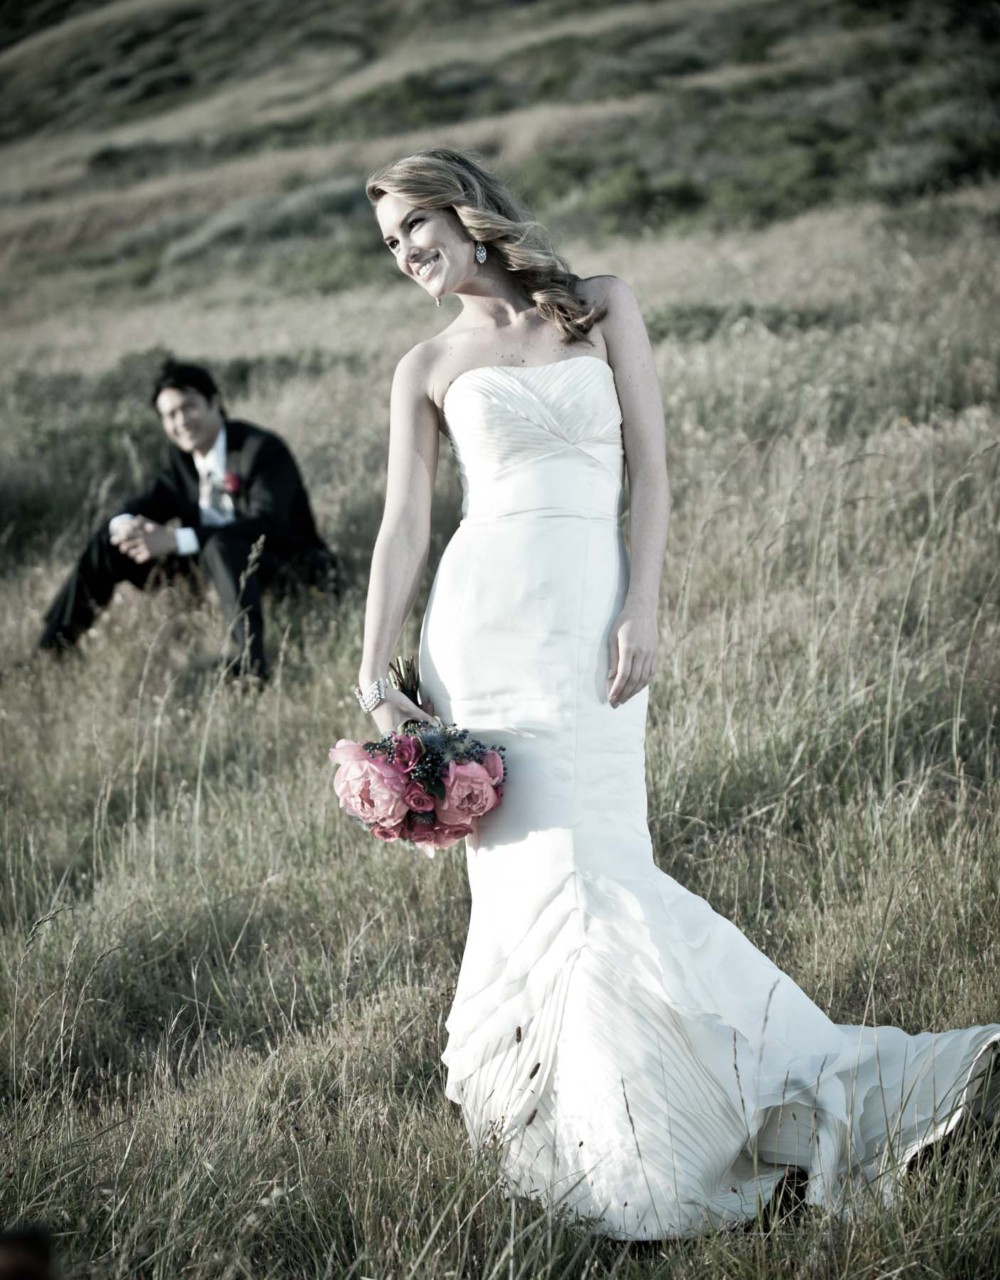 Looking for a creative wedding photographer in Wasilla?